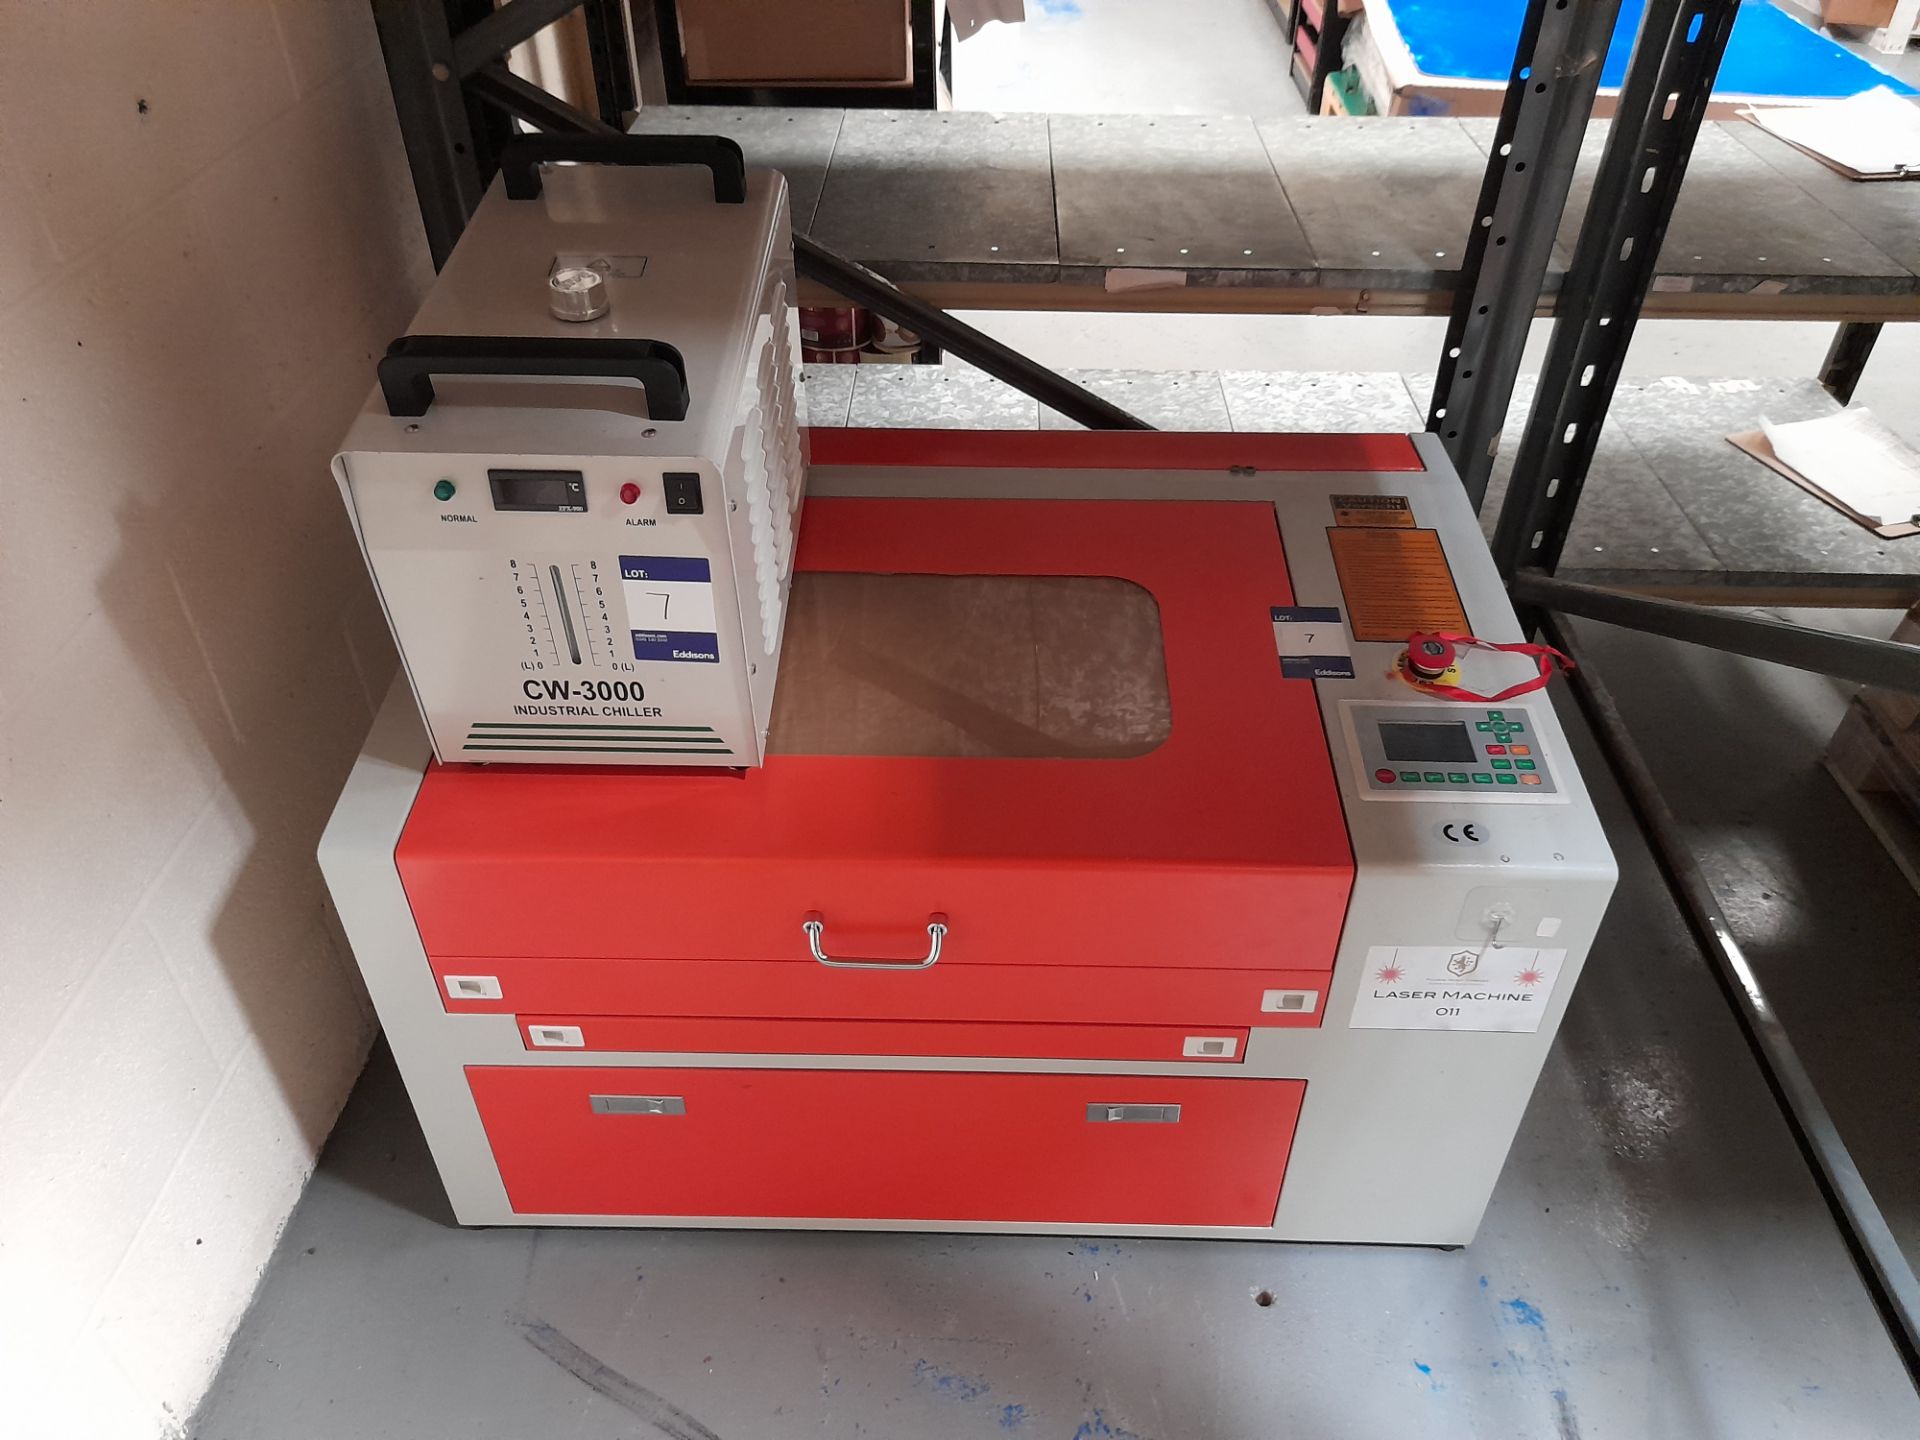 Laser engraving machine, with CW-3000 industrial chiller - Image 2 of 2